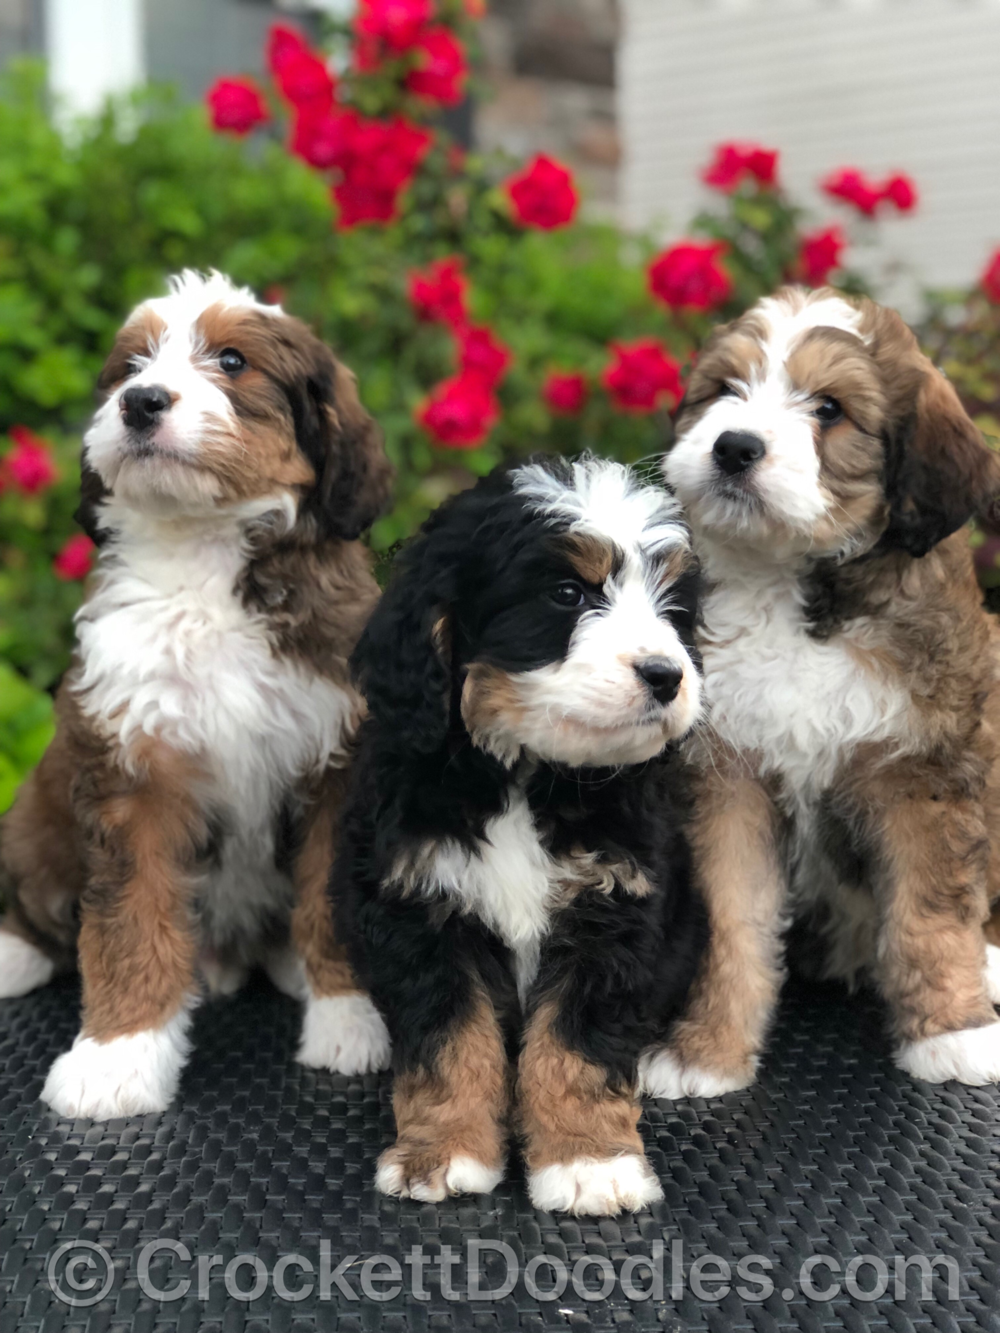 Mini Bernedoodles Aren't For EverybodyHere's What You Need to Know